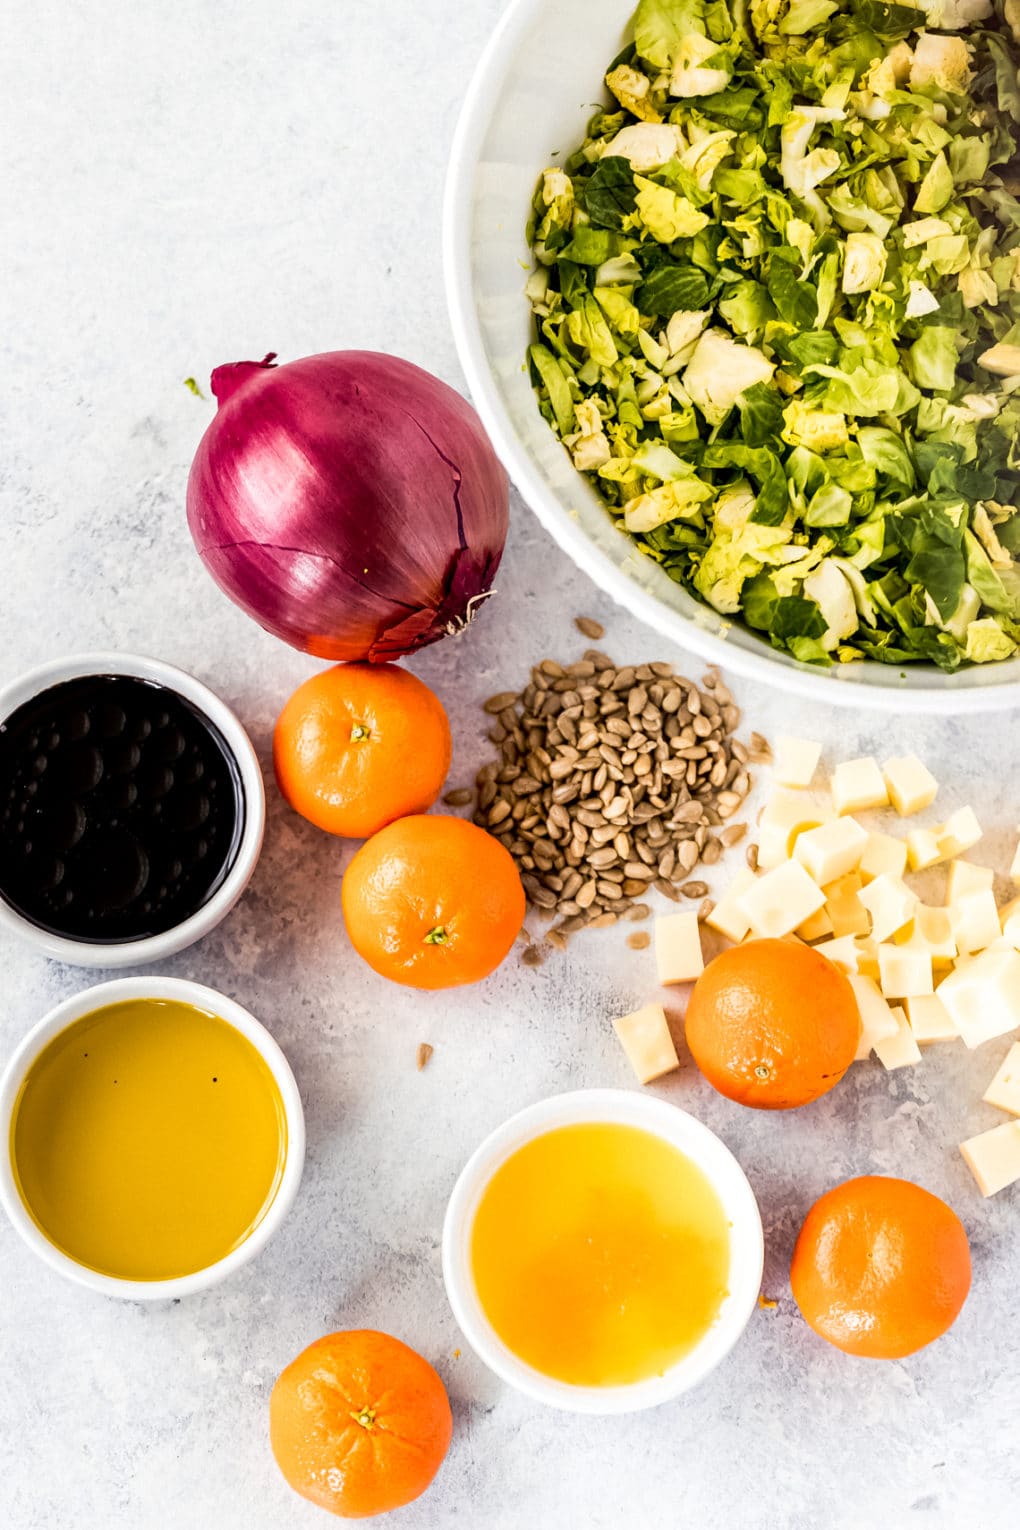 ingredients to make a tangy brussel sprout salad